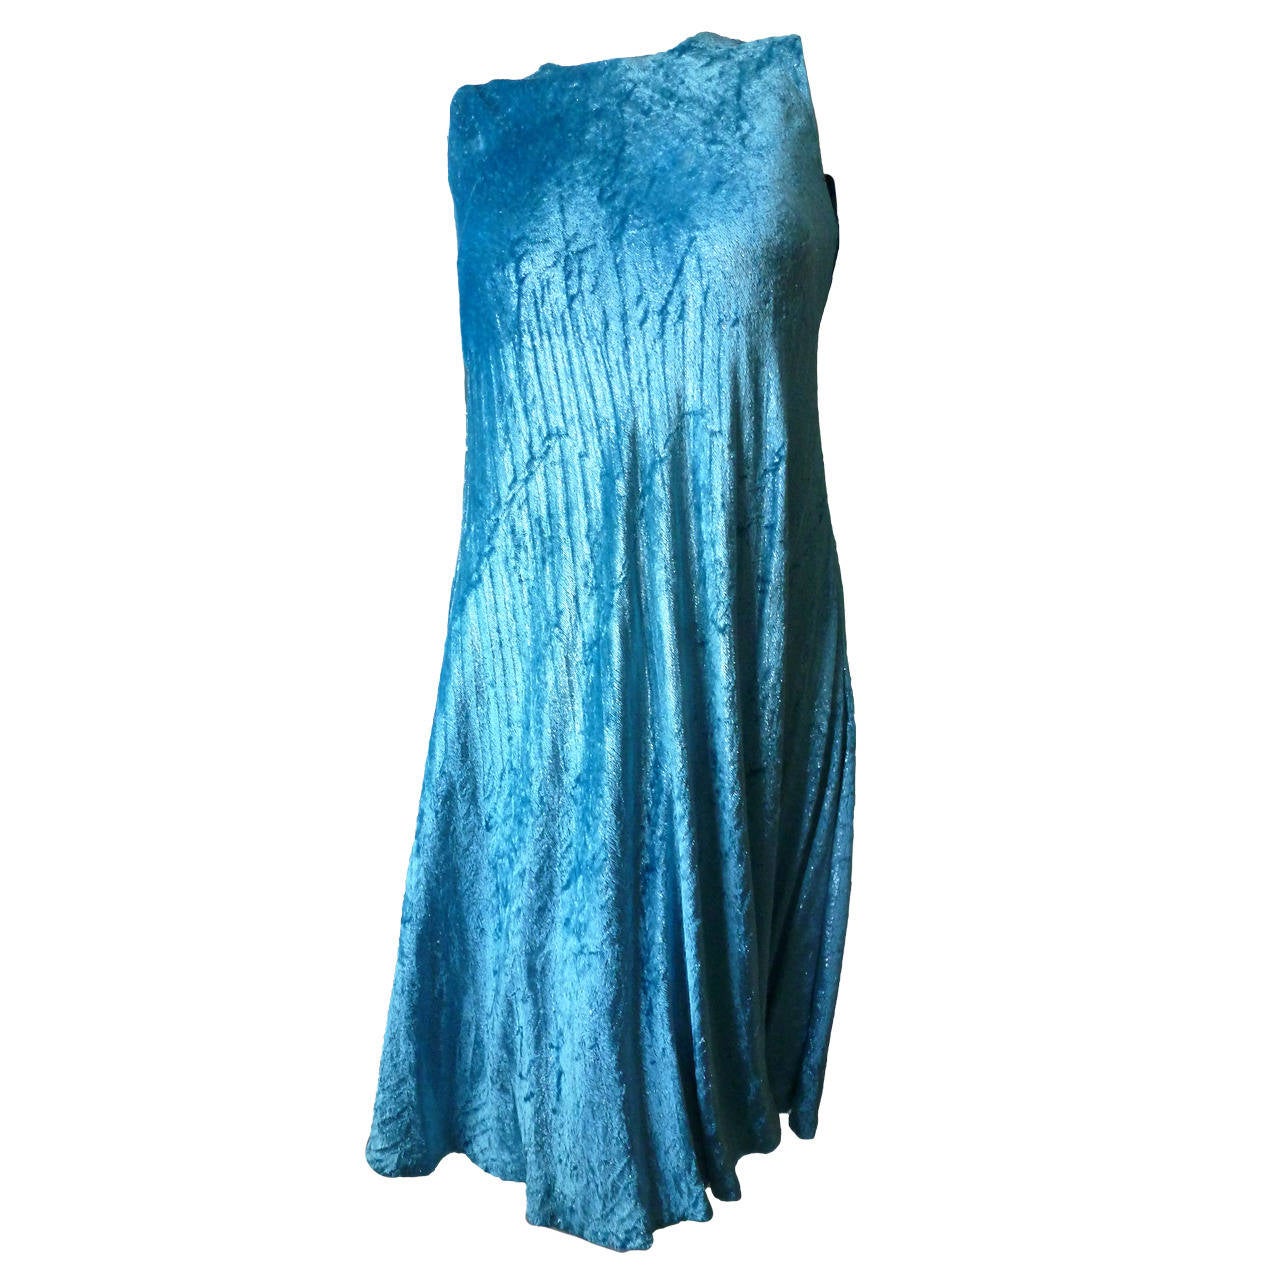 Gianni Versace Couture Crushed Velvet Cocktail Dress Spring 1994 For Sale